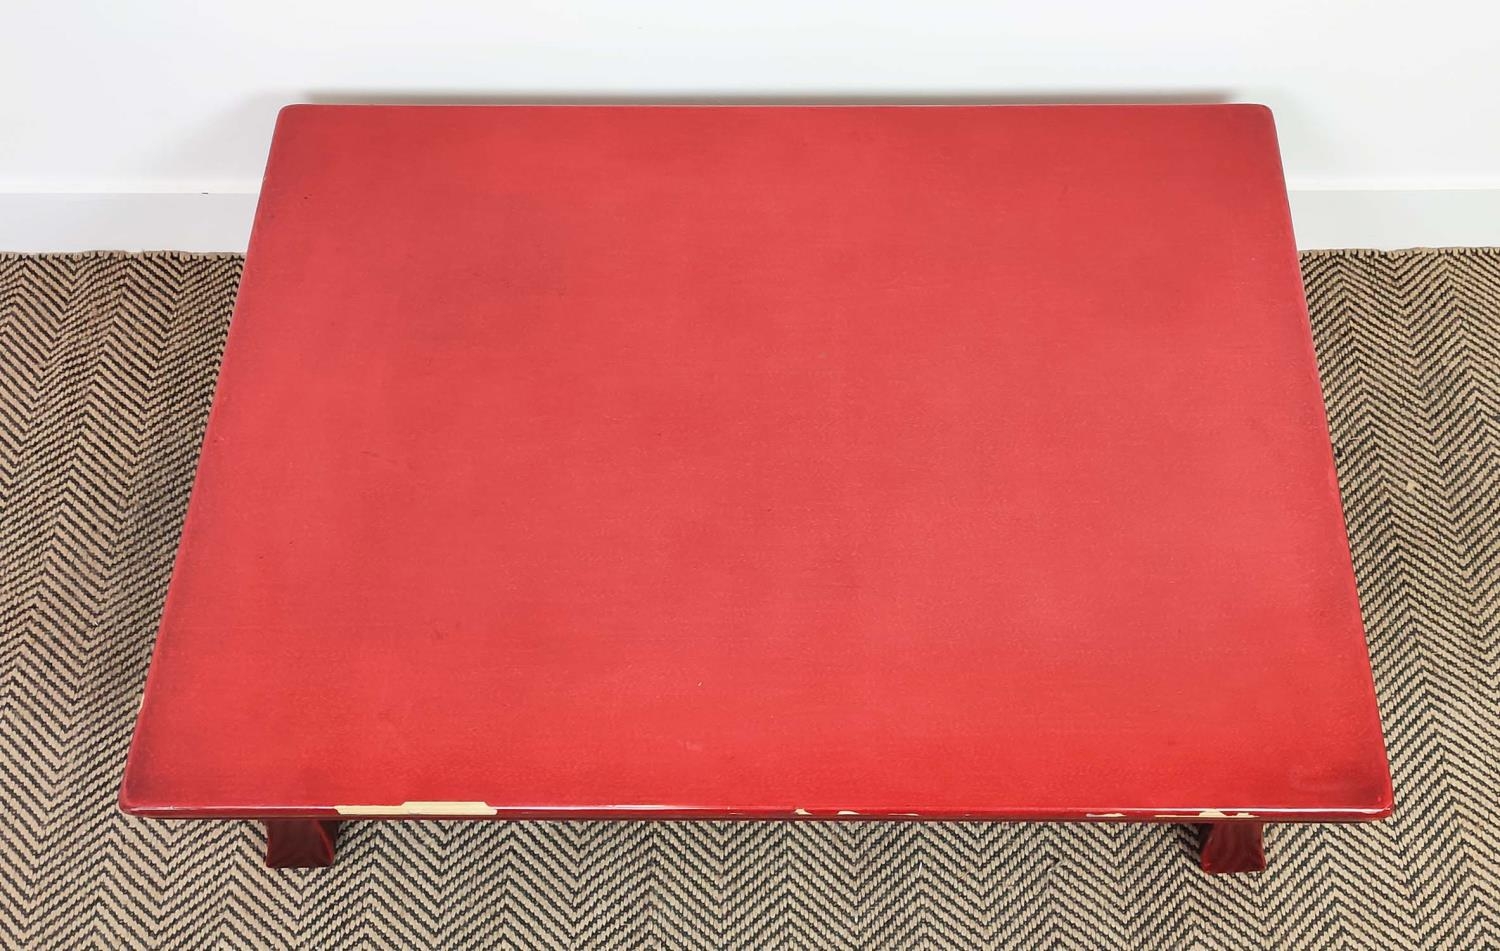 LOW TABLE, Asian in red lacquer finish, 106cm W x 75cm D x 35cm H lacquer. - Image 4 of 4